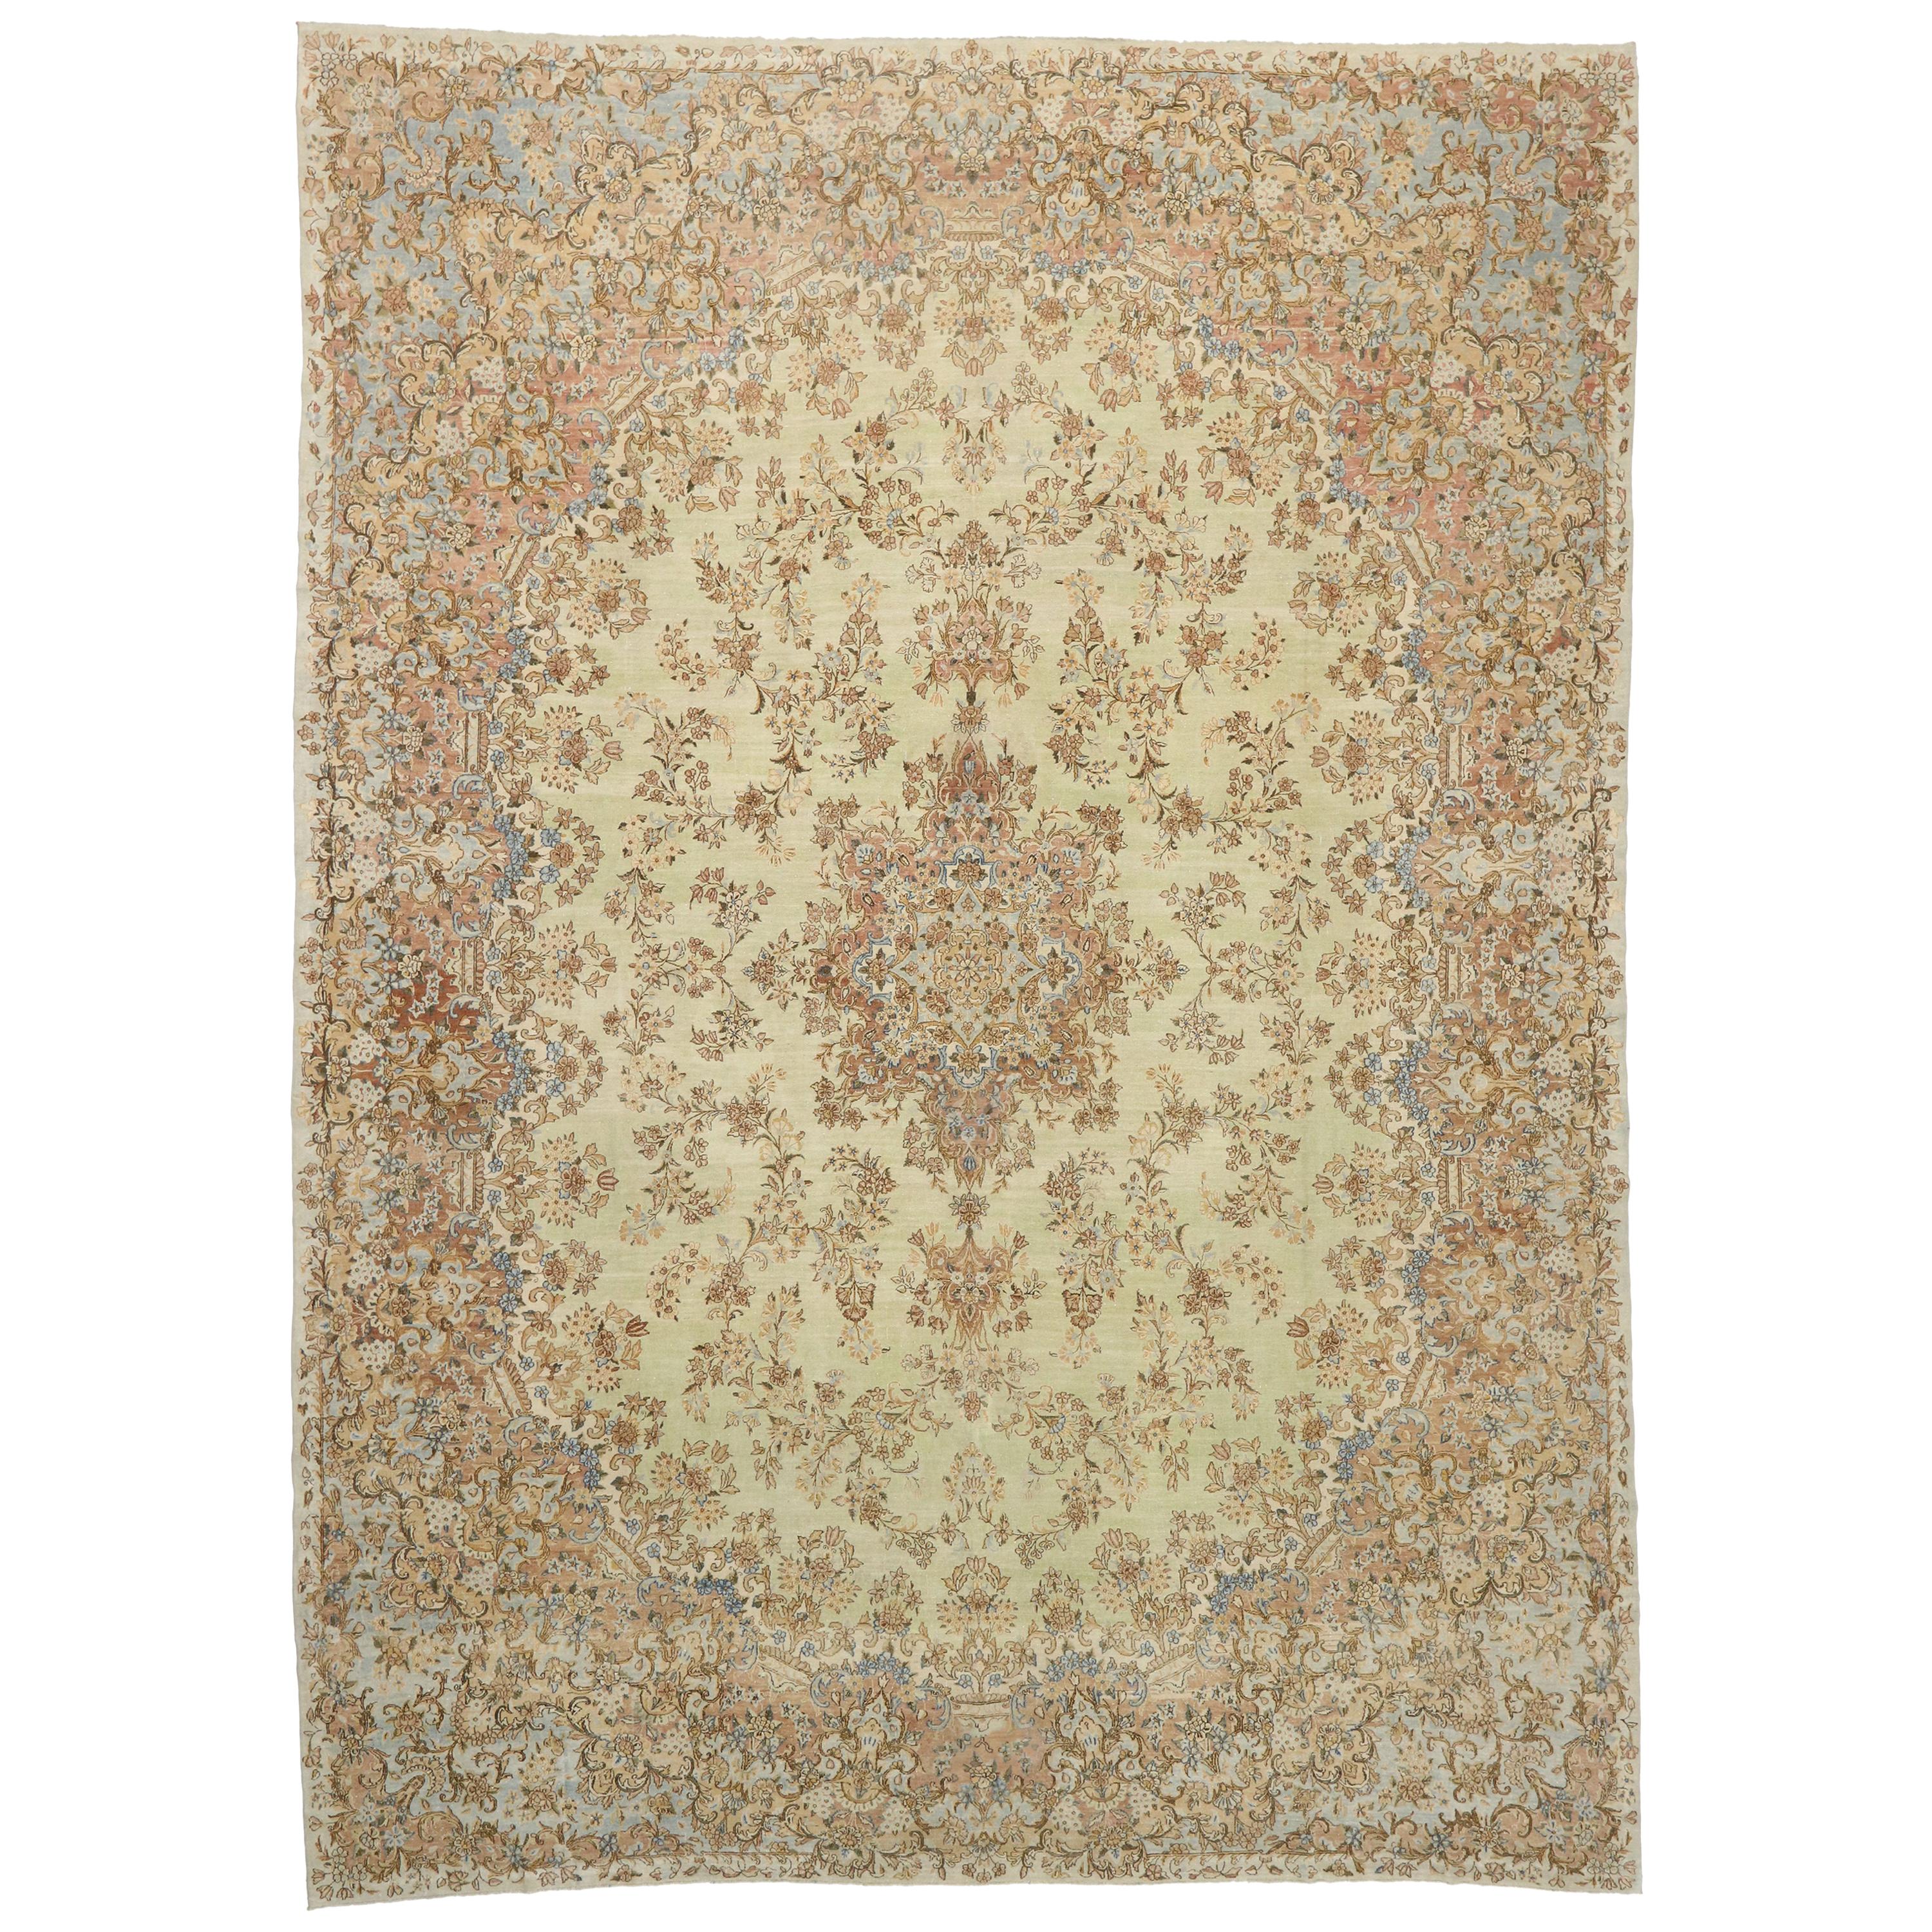 Distressed Antique Persian Kerman Rug with French Provincial and Georgian Style